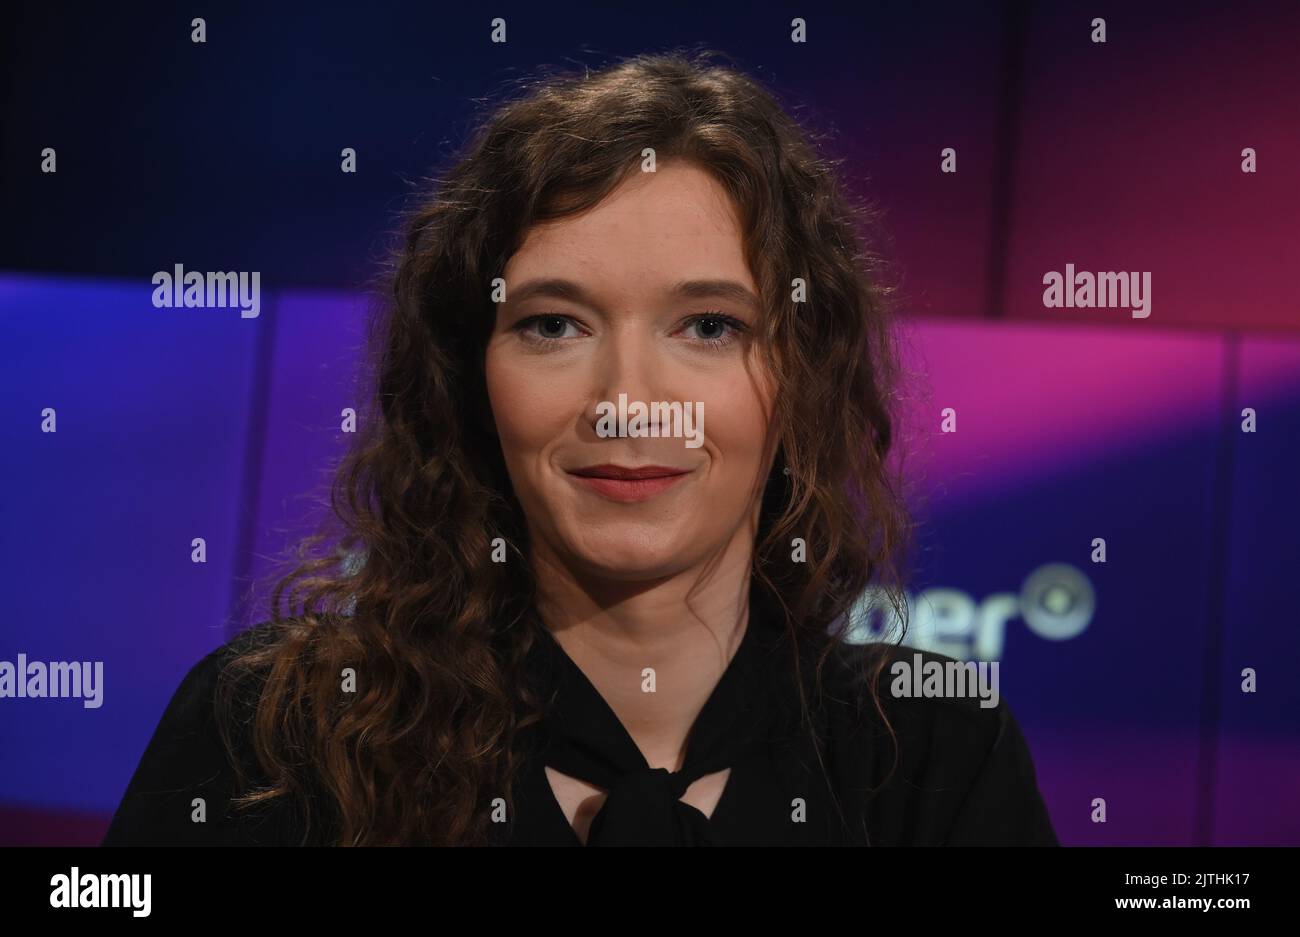 Cologne, Germany. 30th Aug, 2022. The Time journalist Anna Mayr as a guest on the ARD talk show 'Maischberger Credit: Horst Galuschka/dpa/Horst Galuschka dpa/Alamy Live News Stock Photo